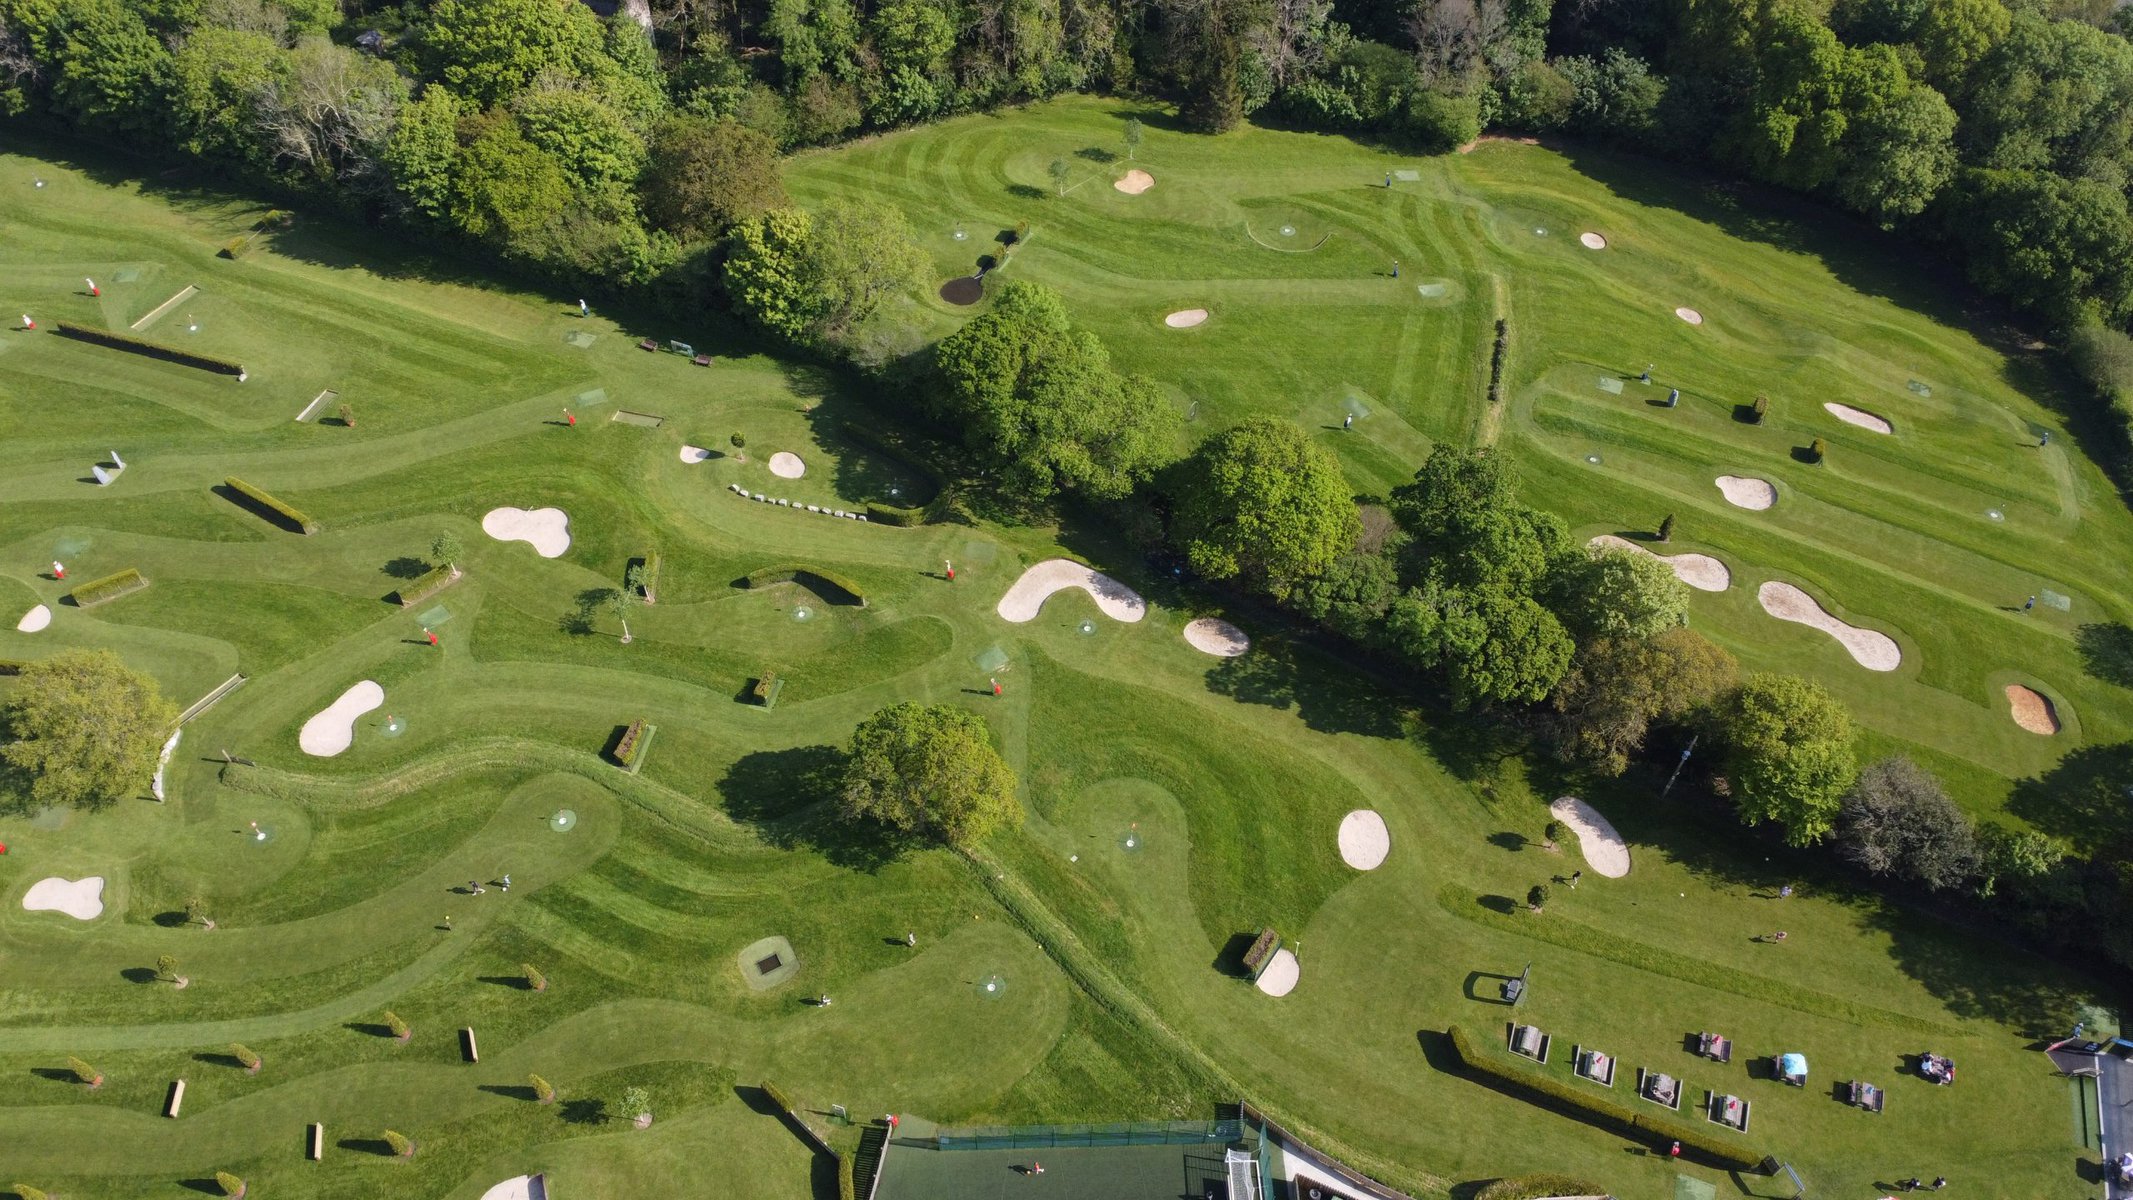 The best football golf course in the world - Cornwall FootballGolf